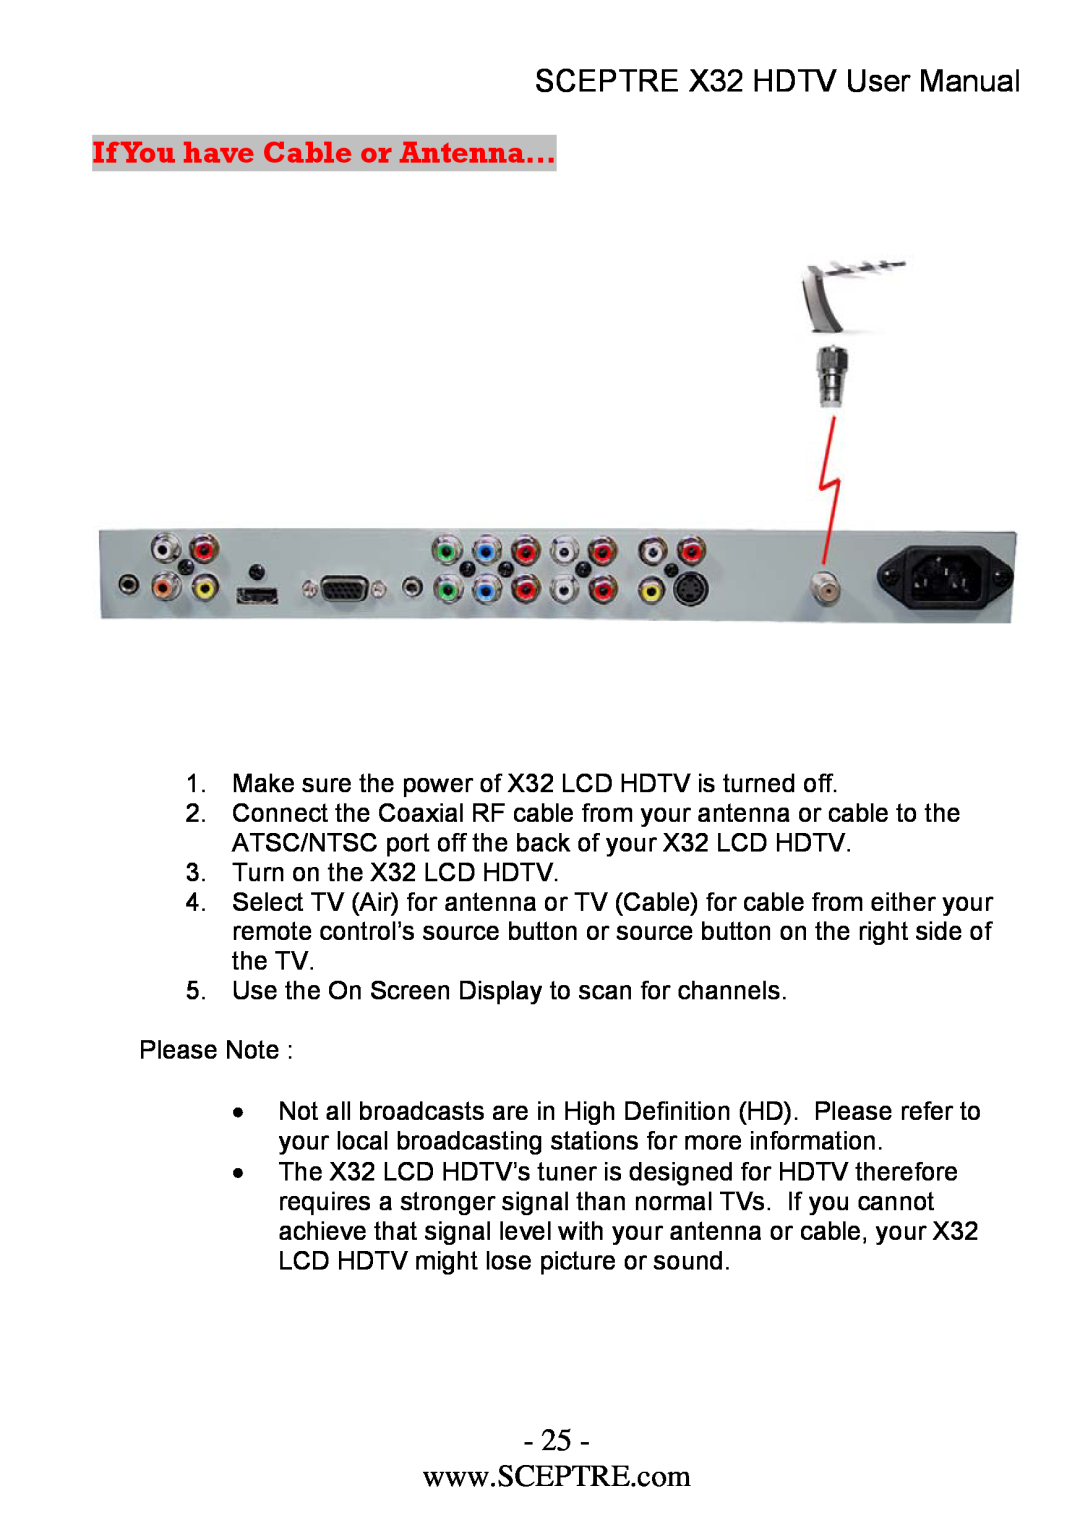 Sceptre Technologies x32 user manual If You have Cable or Antenna…, SCEPTRE X32 HDTV User Manual 